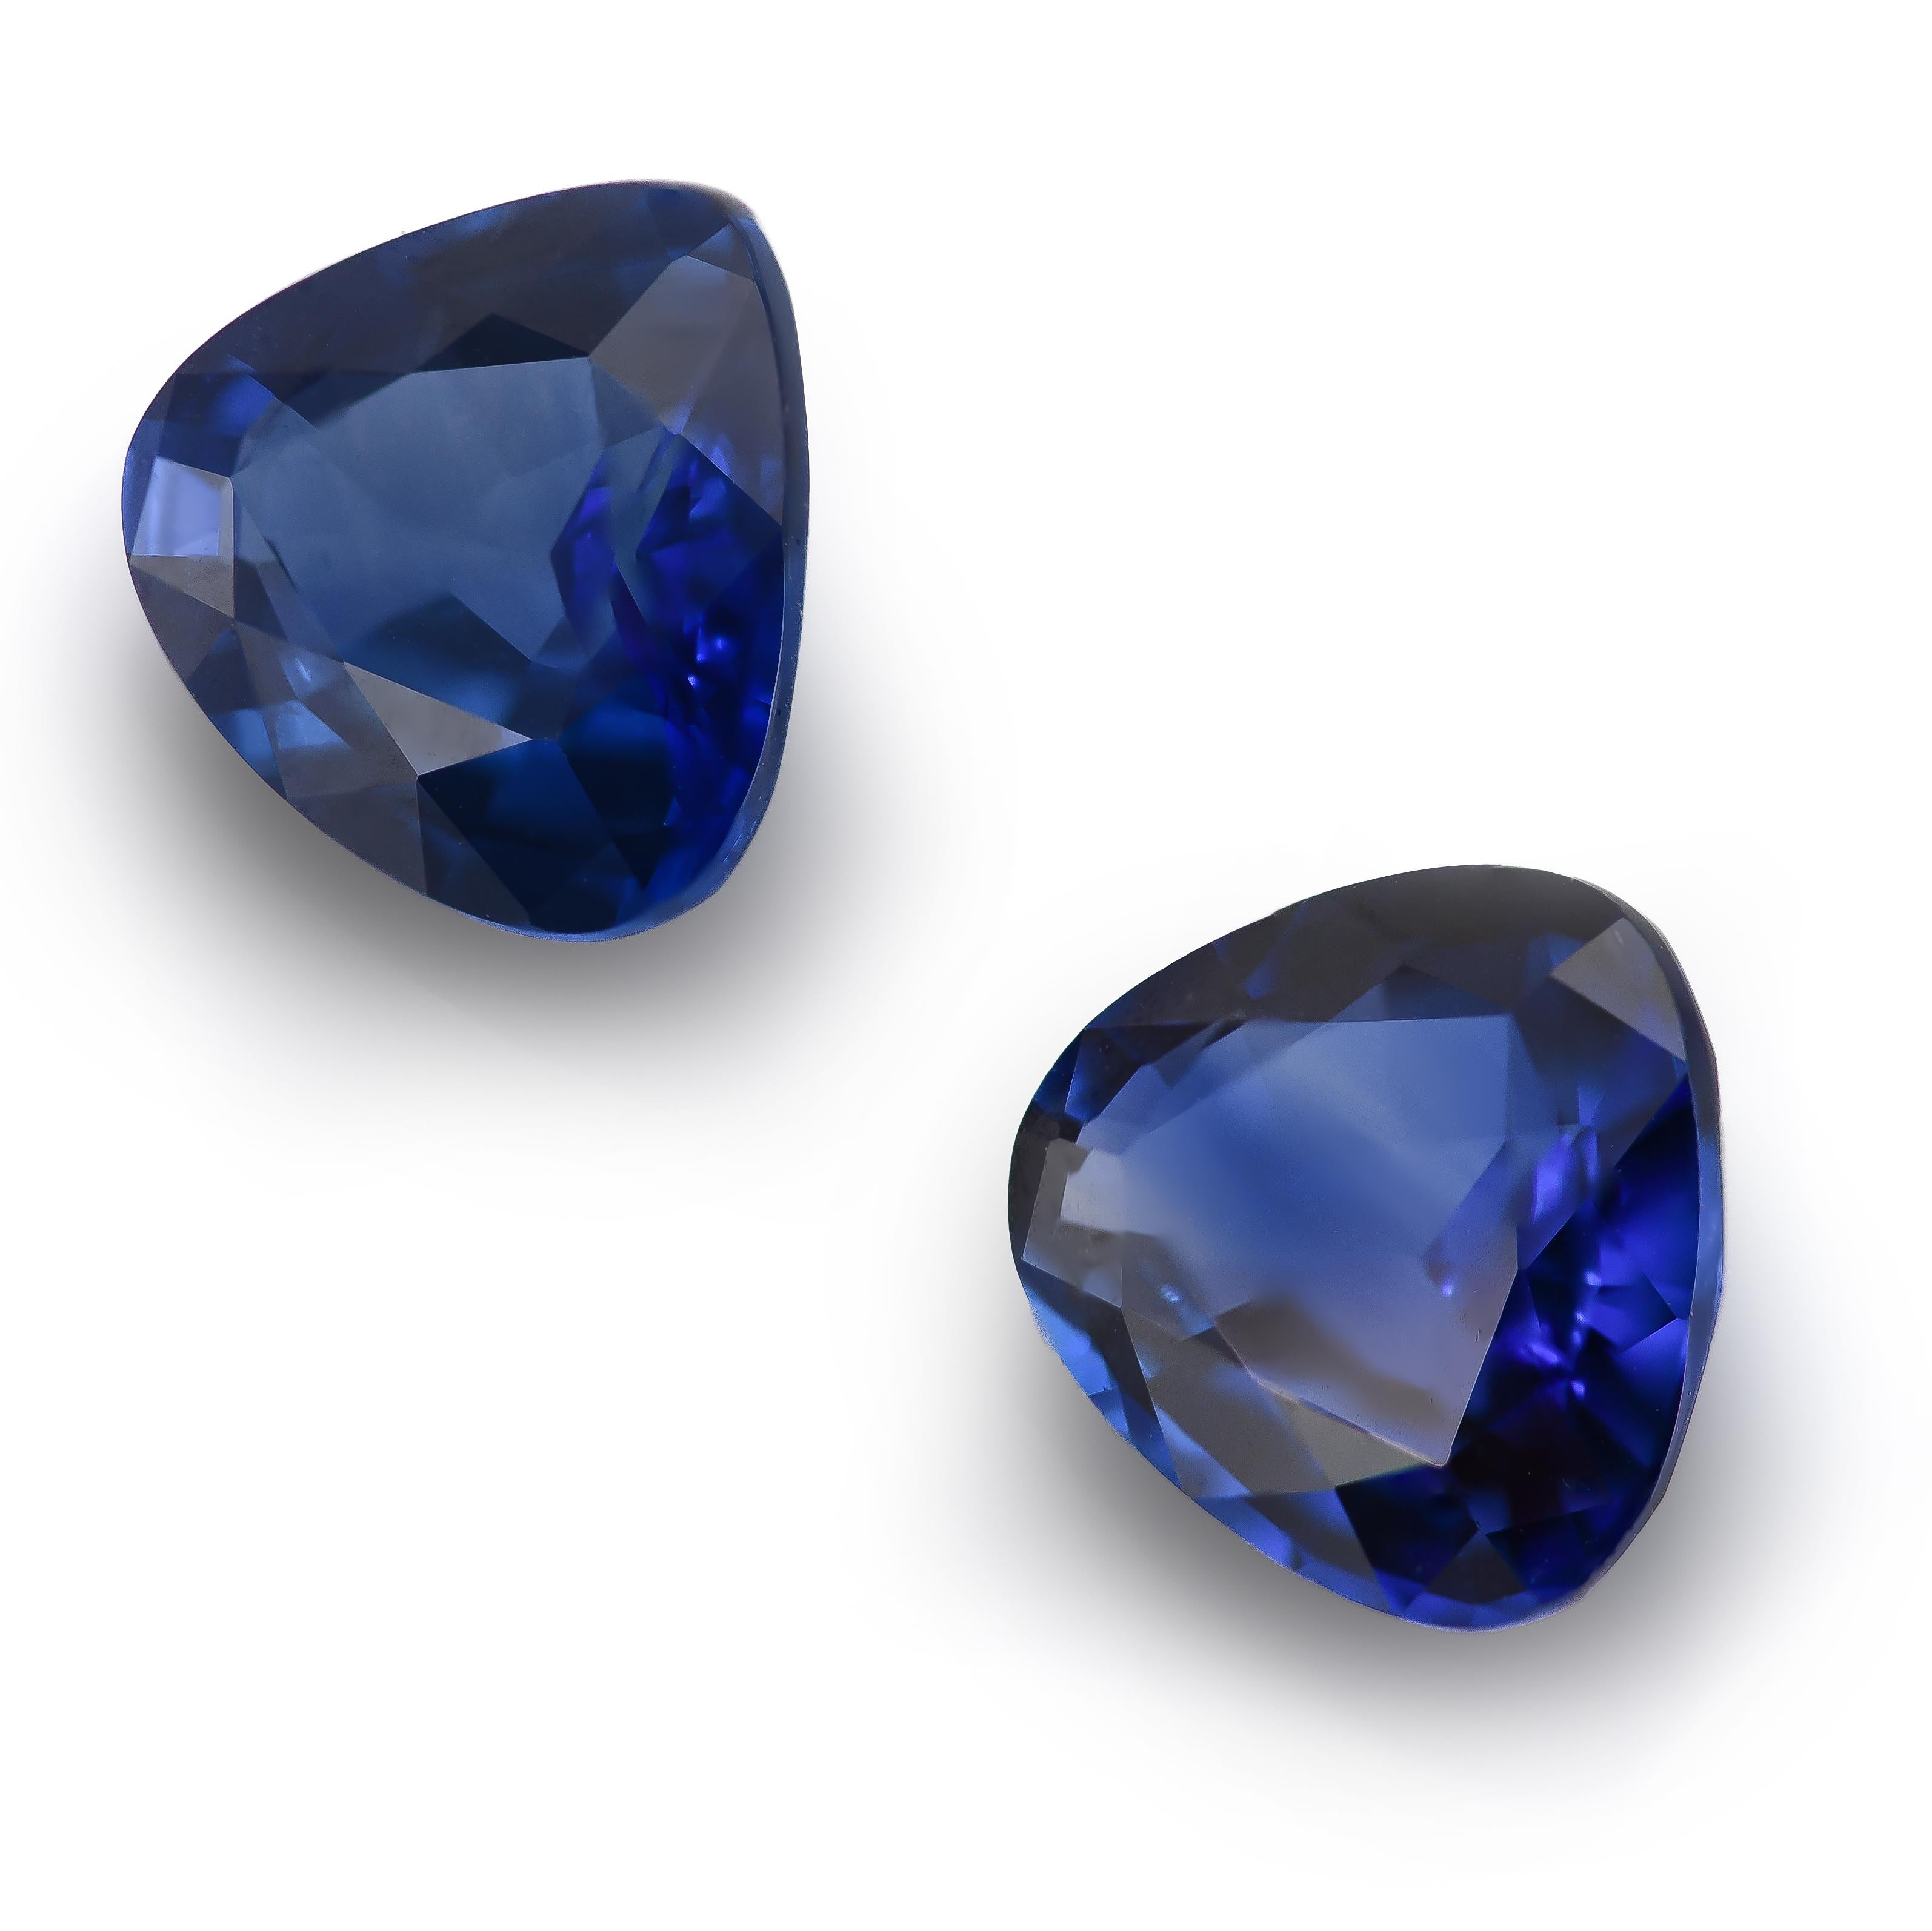 Introducing a dazzling Natural Blue Sapphire Pair totaling 4.17 carats. These pear-shaped gems, measuring 7.73 x 8.49 x 4.20 mm and 7.63 x 8.28 x 3.94 mm respectively, exhibit a brilliant/step cut that accentuates their captivating blue hue. While